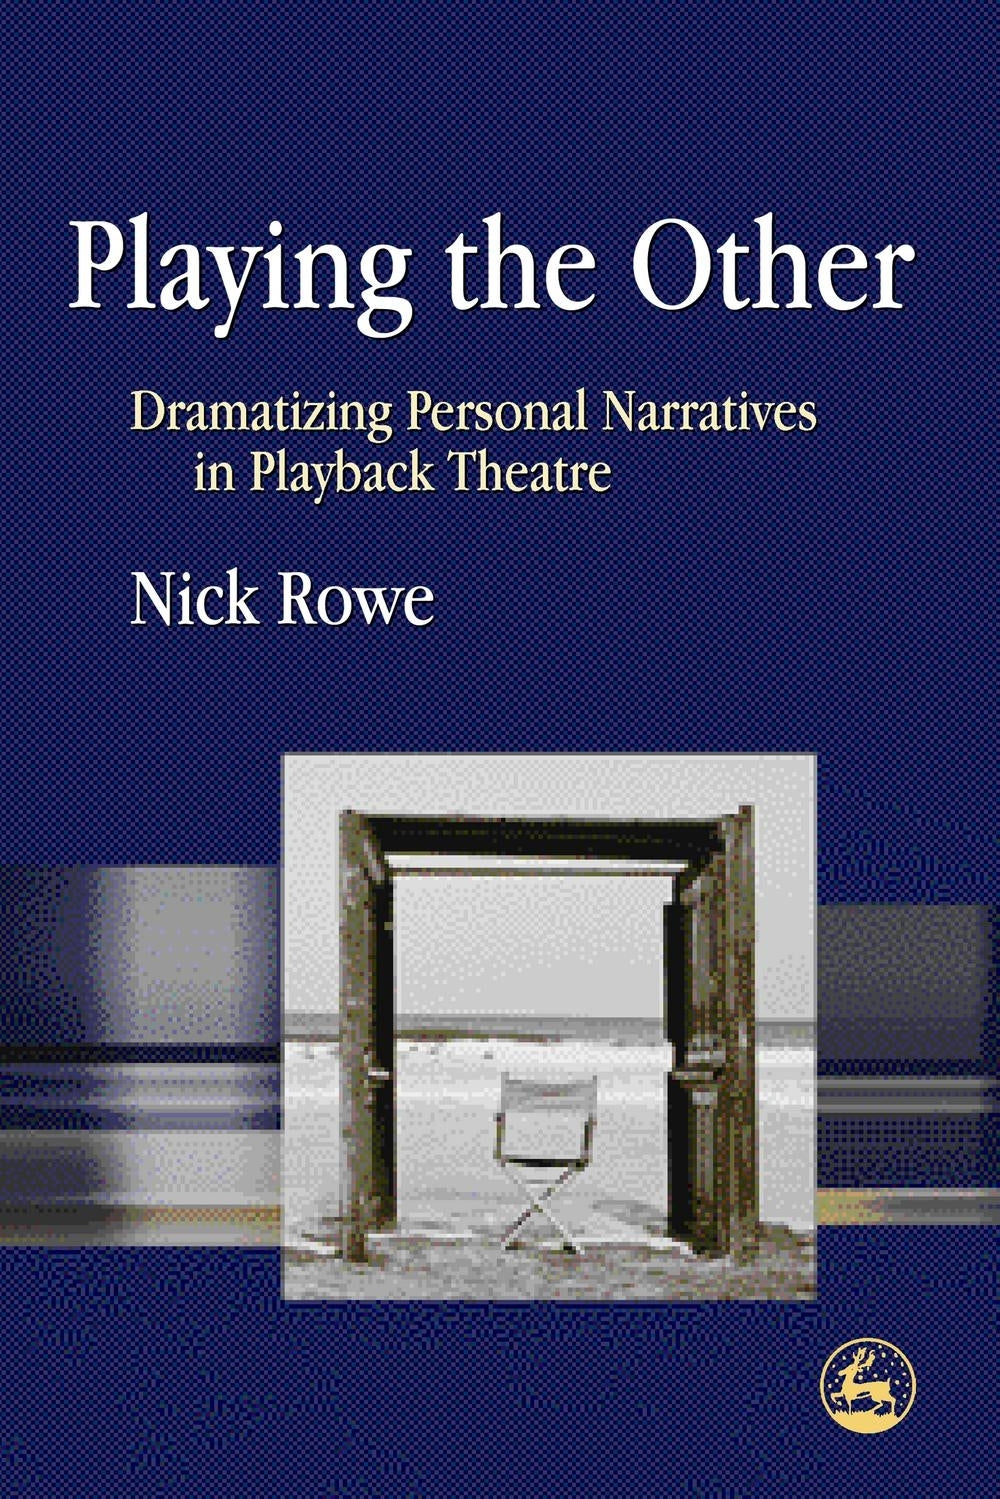 Playing the Other by Nick Rowe